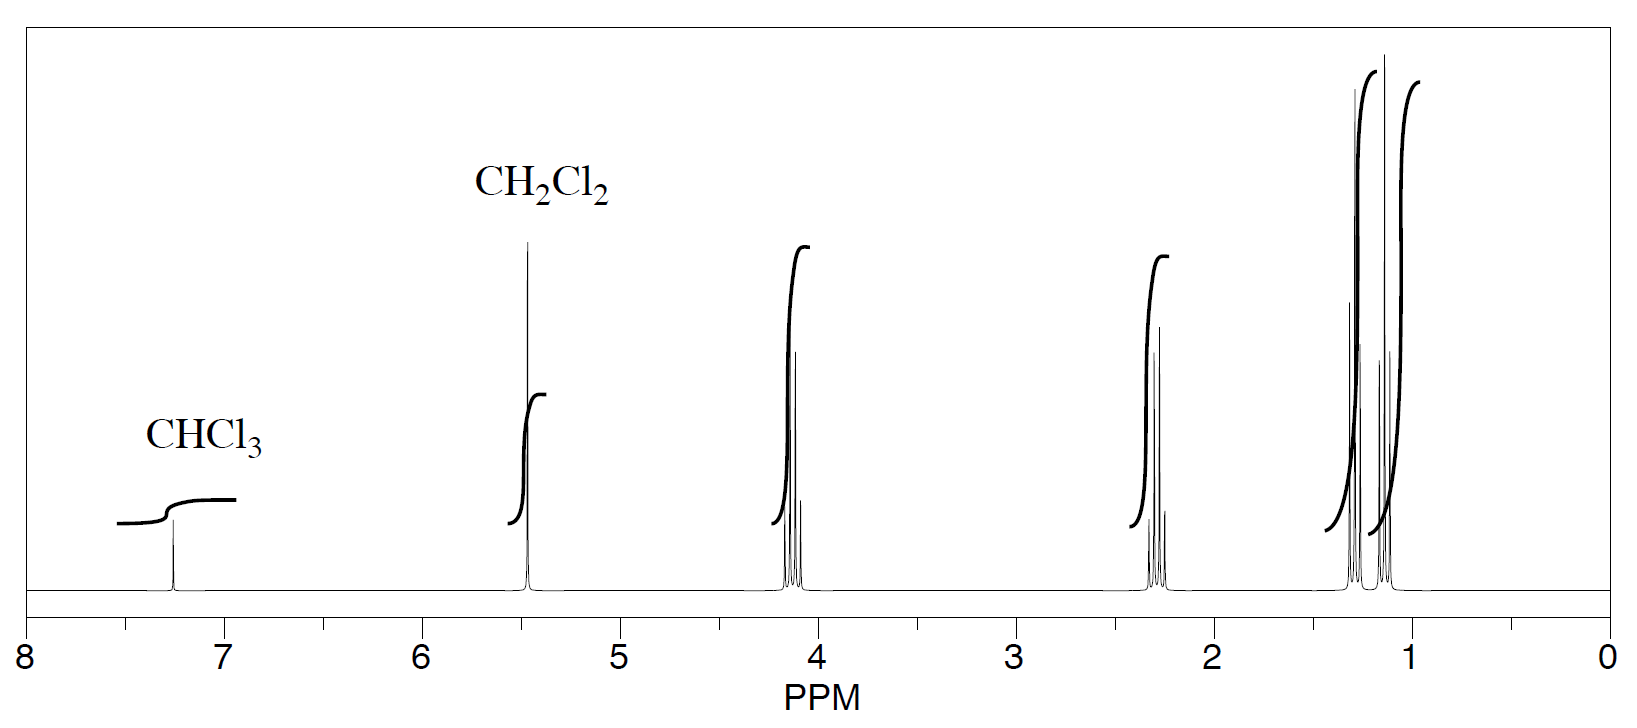 There are six peaks on the H-NMR spectrum at 1.2,1.4, 2.2,4.1,5.5, and 7.3 ppm. 